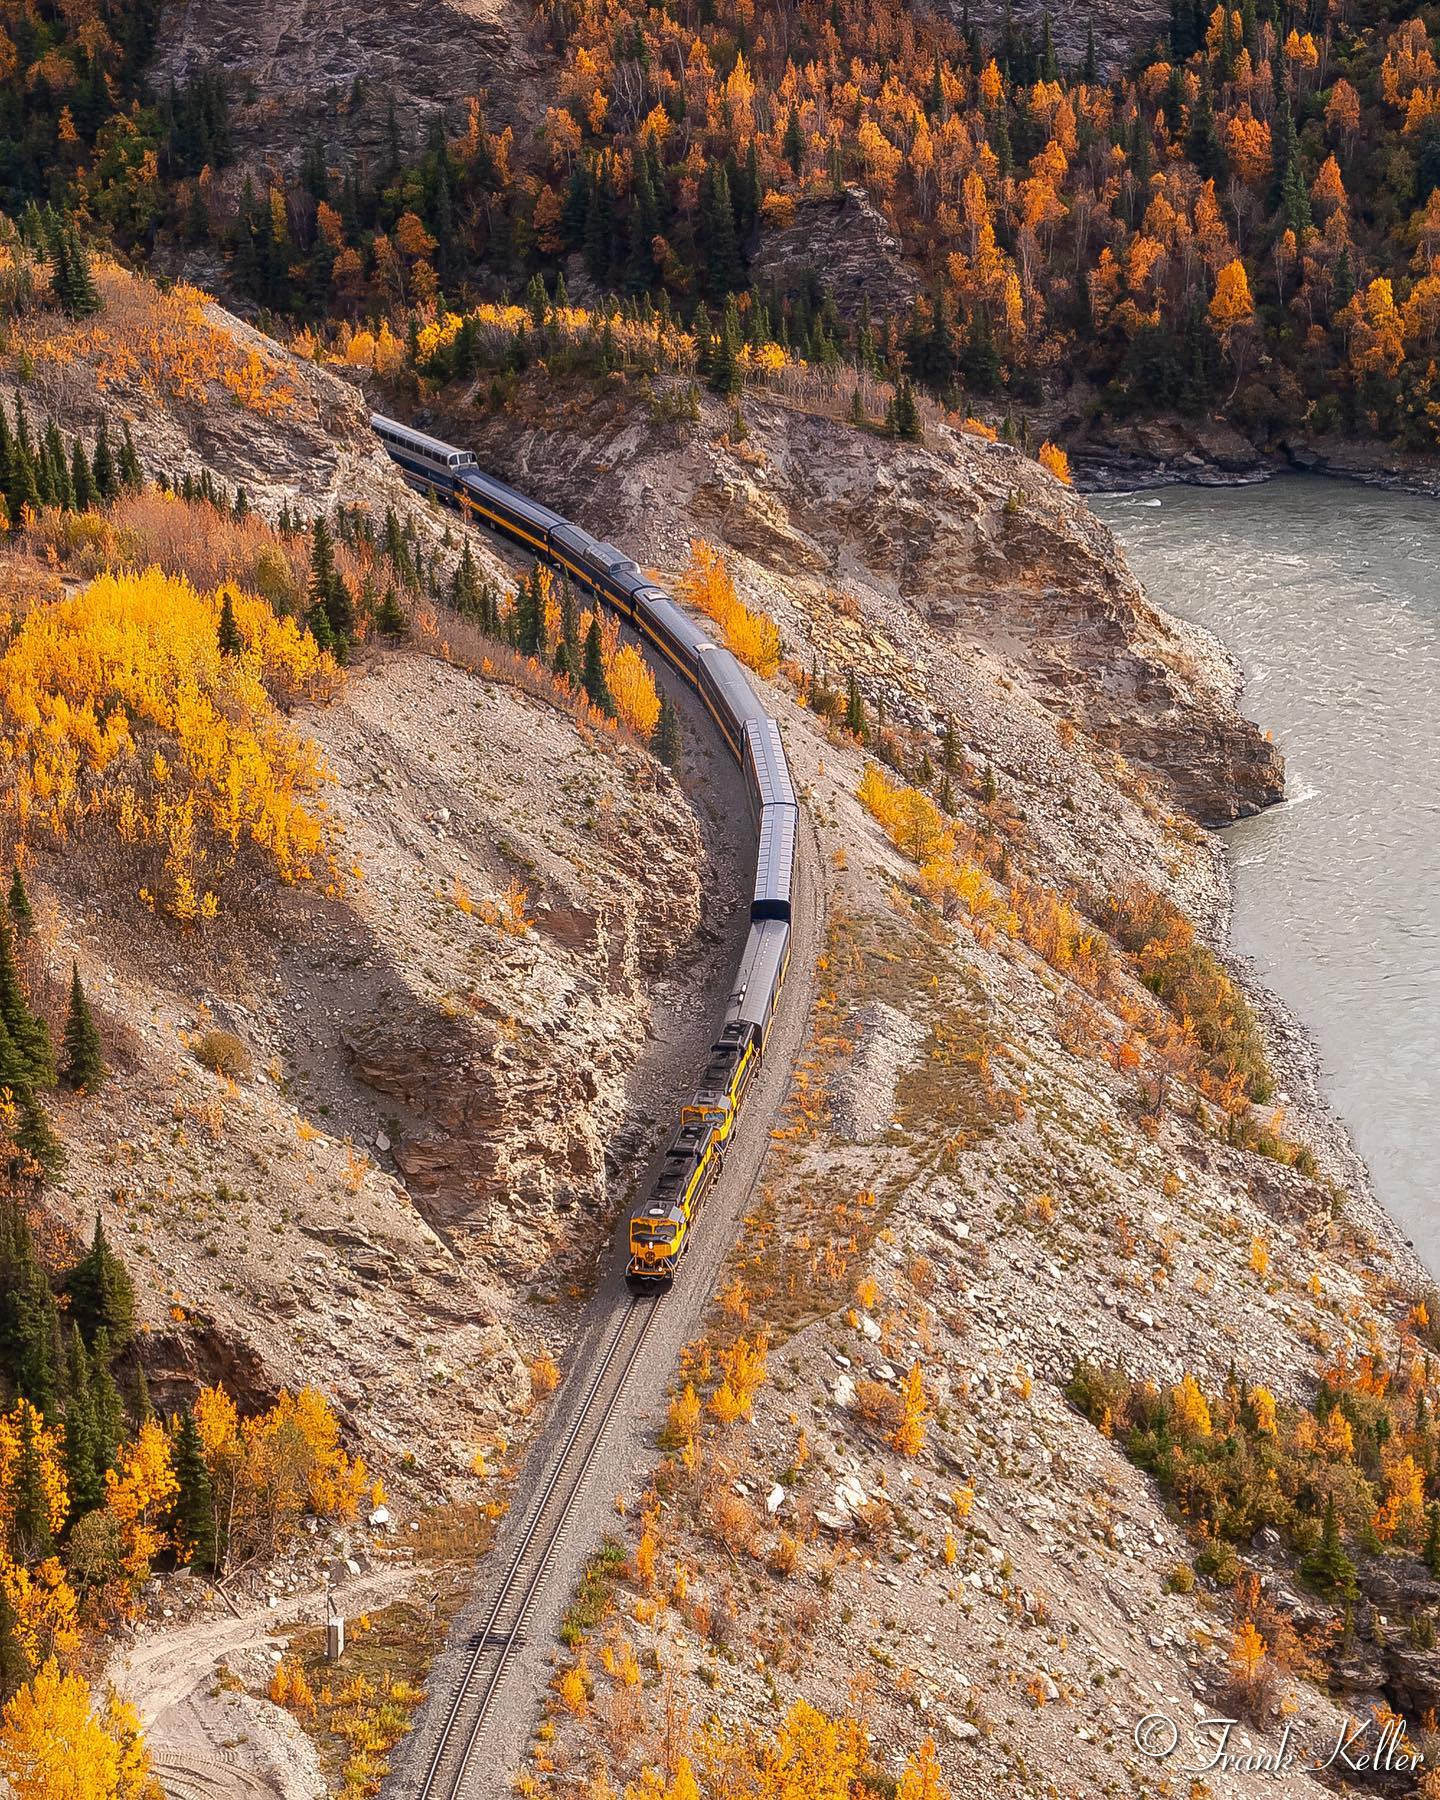 The southbound Denali Star rolls through the Fall colors along the Nenana River in Healy Canyon.